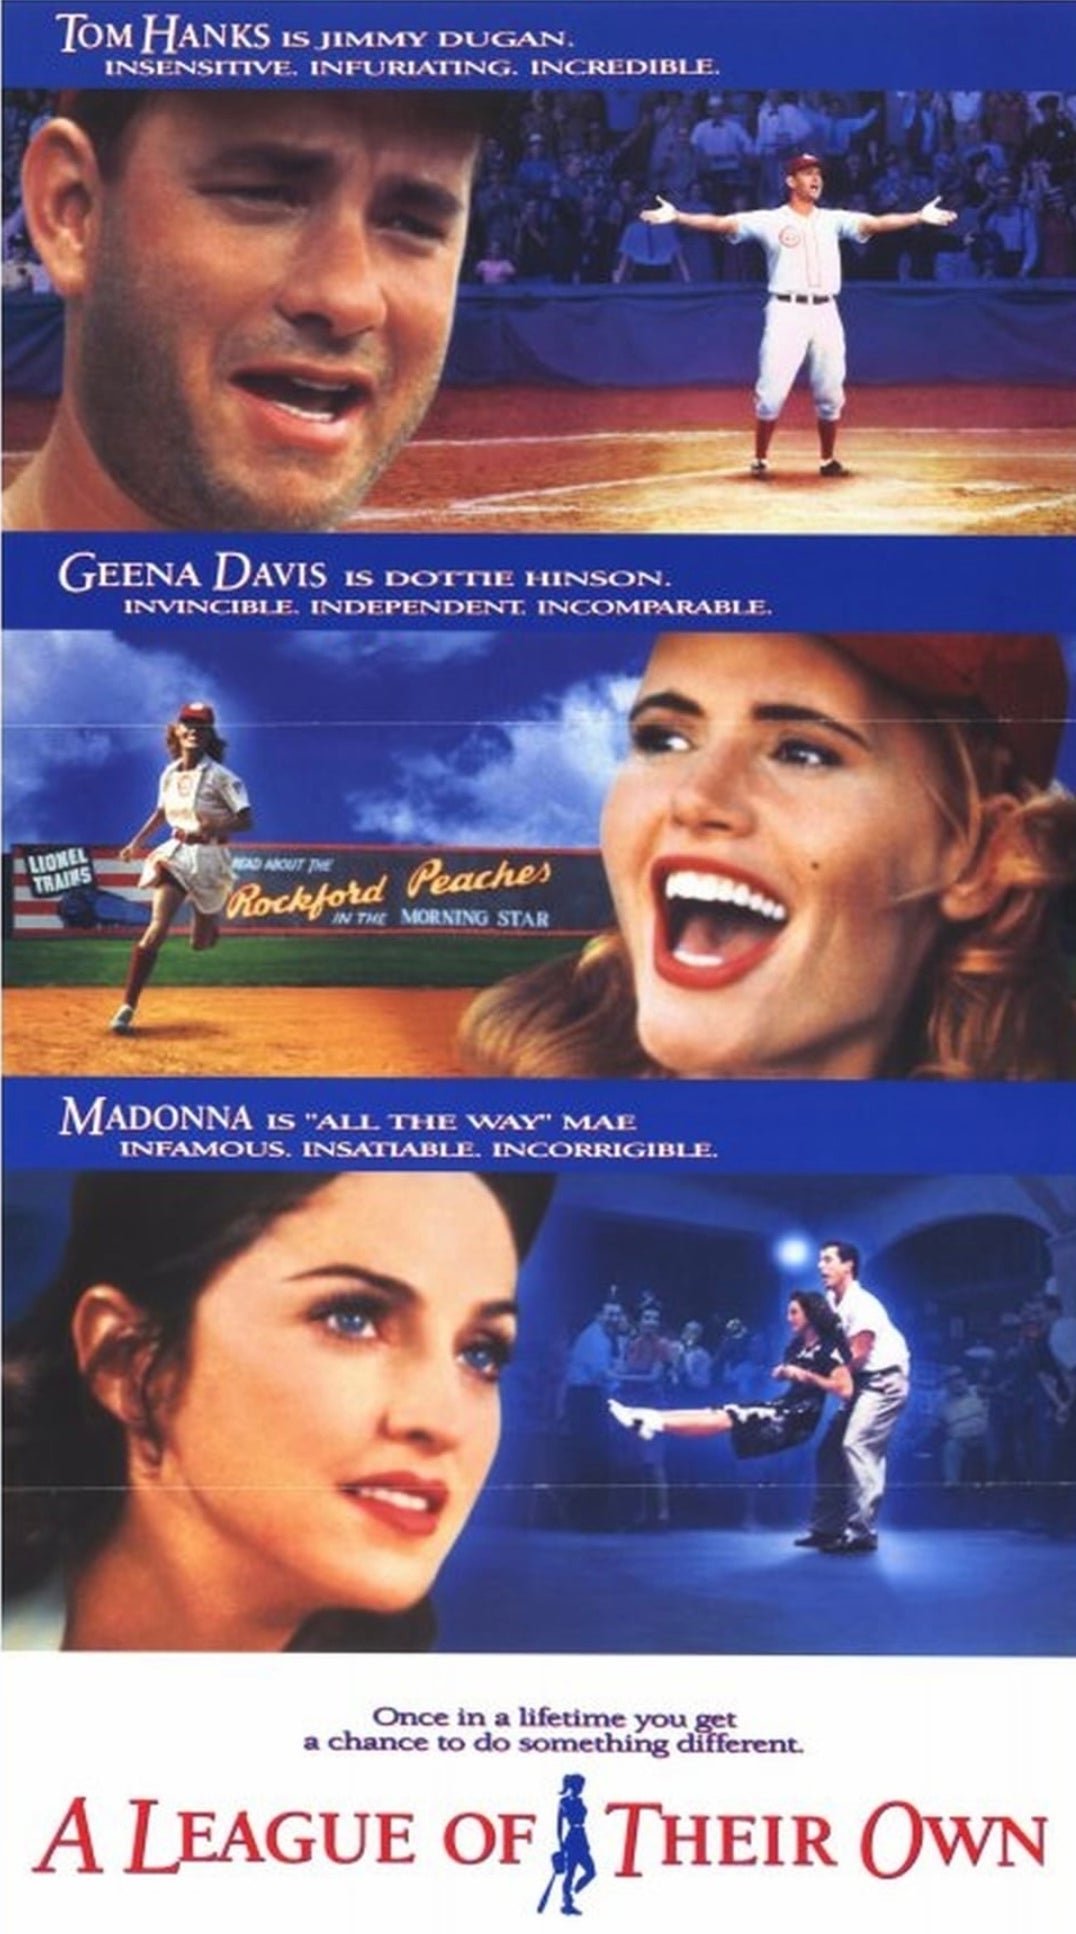 Movie poster for &quot;A League of Their Own&quot; featuring actors Tom Hanks, Geena Davis, Madonna, and a scene of women playing baseball